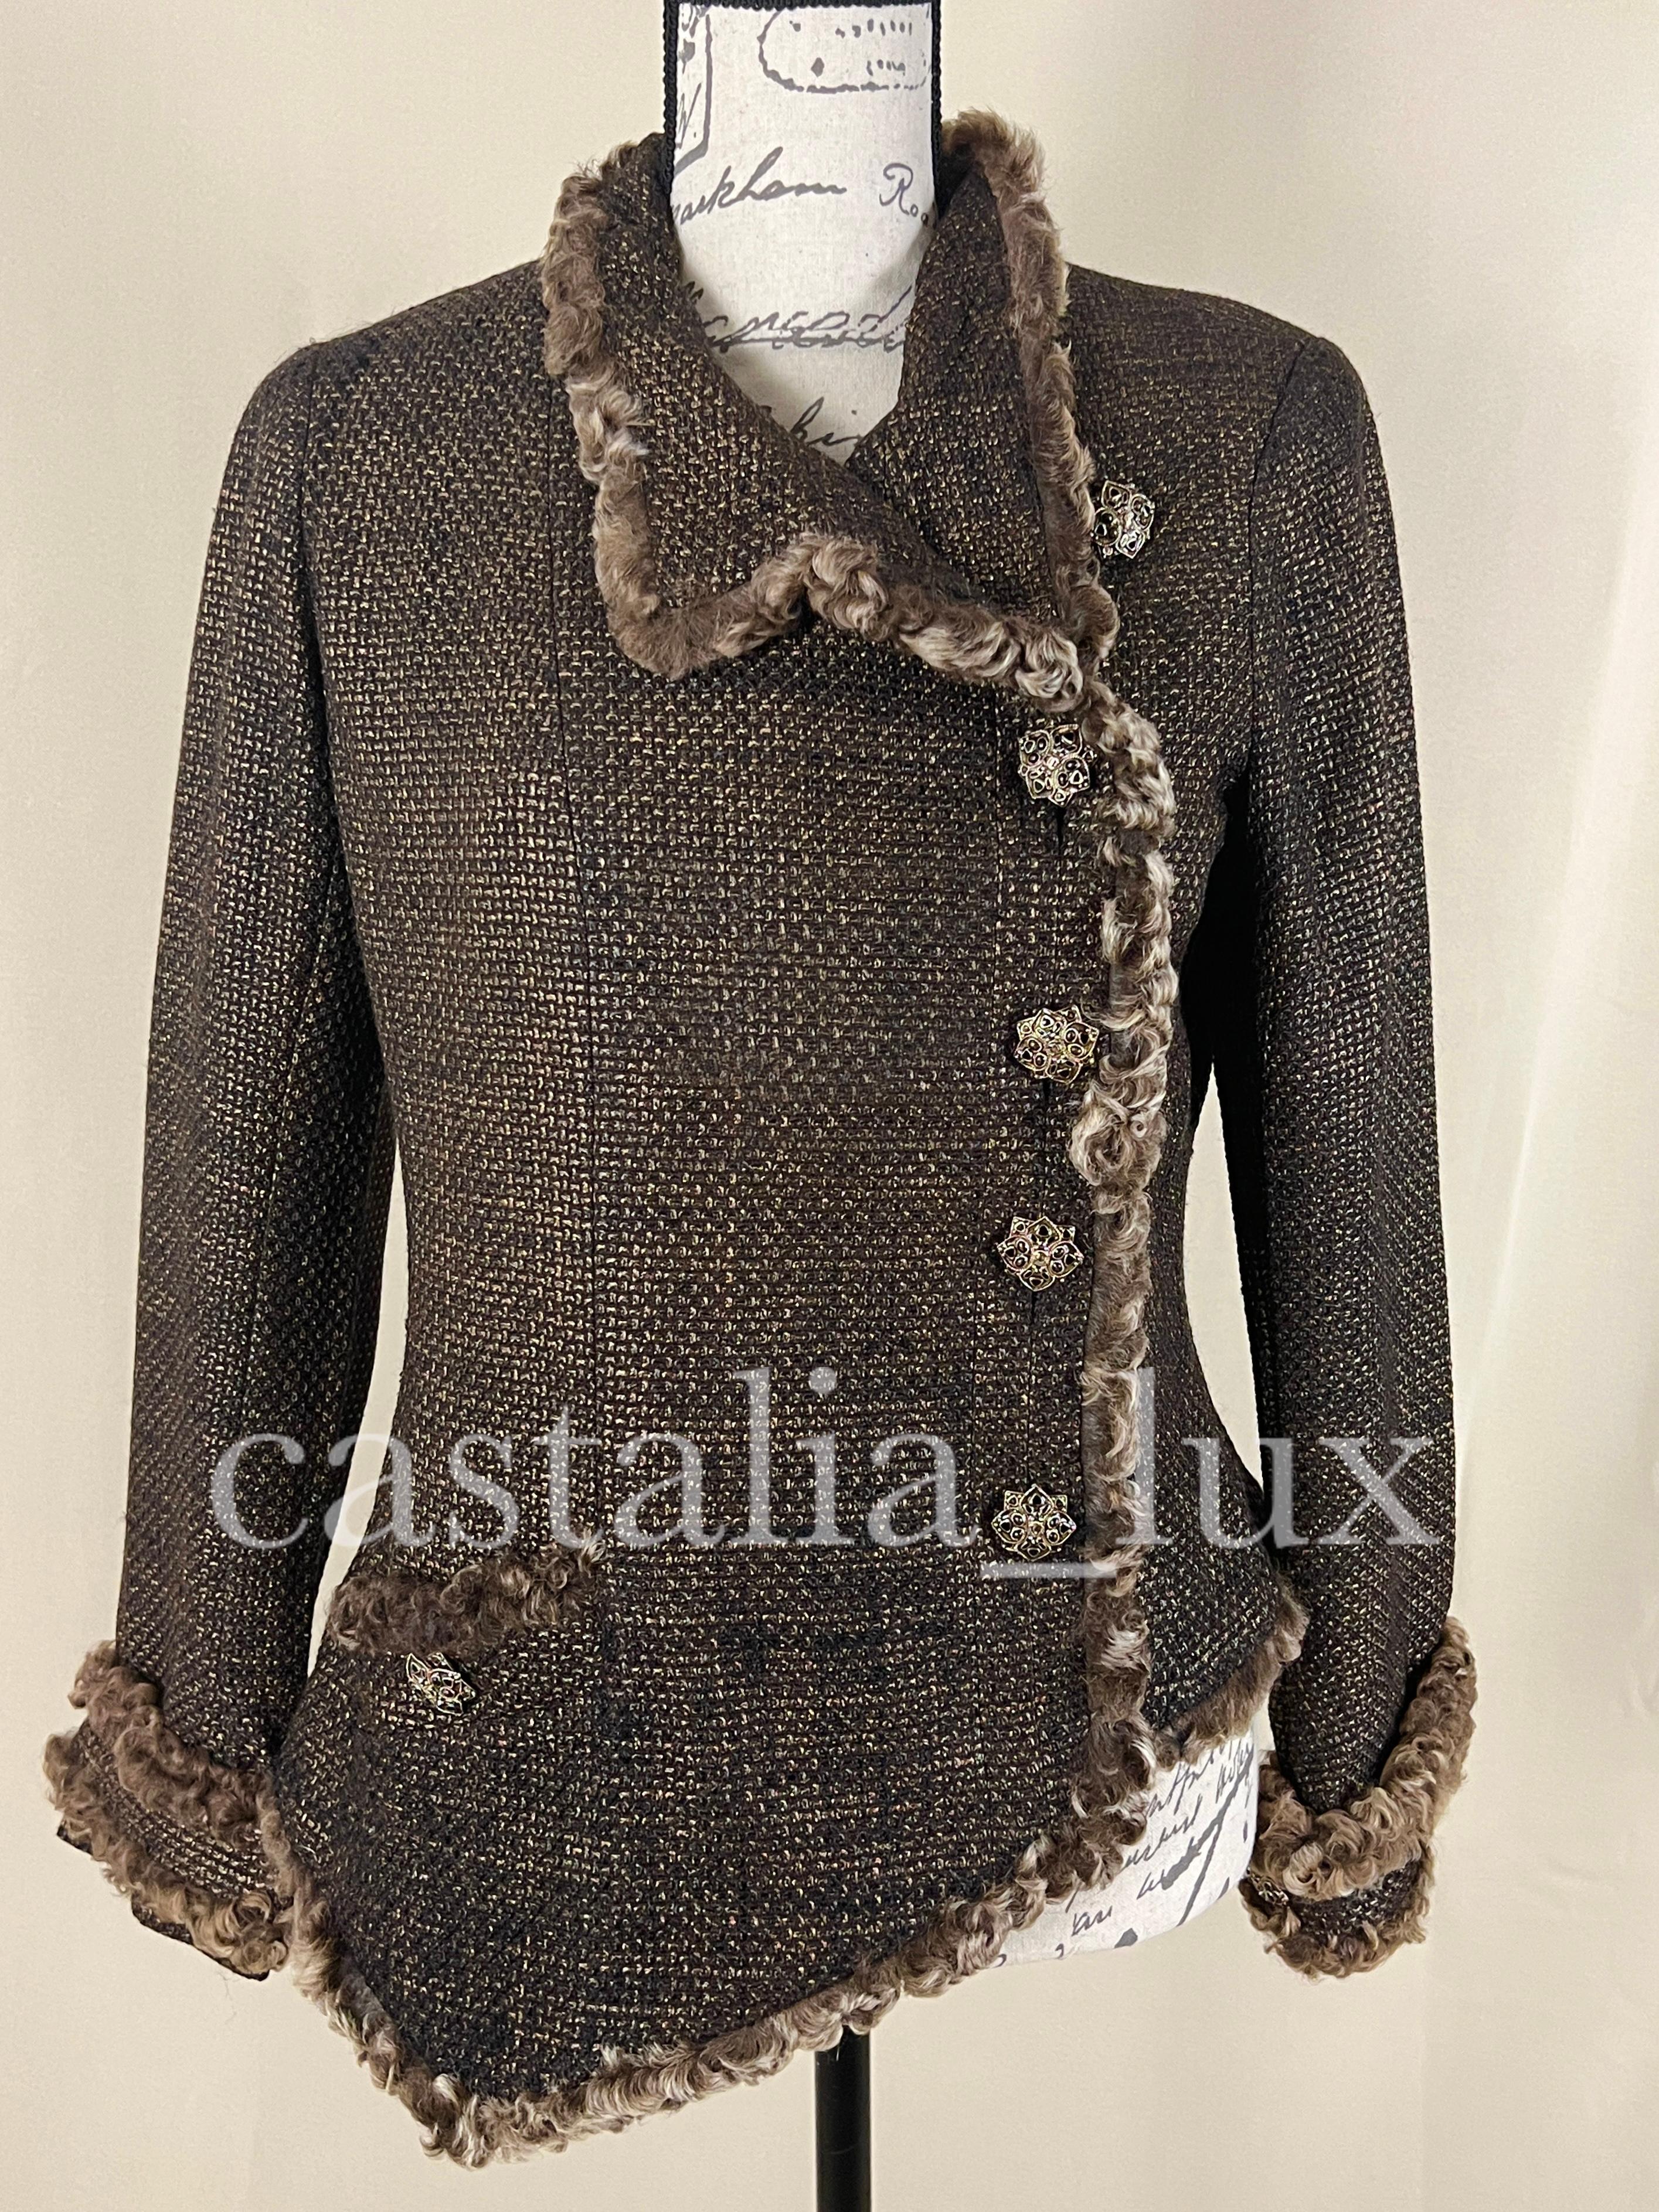 Extremely rare chocolate tweed suit with intricate bronze shimmer and stunning Grpoix buttons.
Size mark 44 FR. Never worn, comes with pouch with extra cloth swatch.
- stunning CC logo jewel Gripoix buttons
- precious lesage tweed with intricate